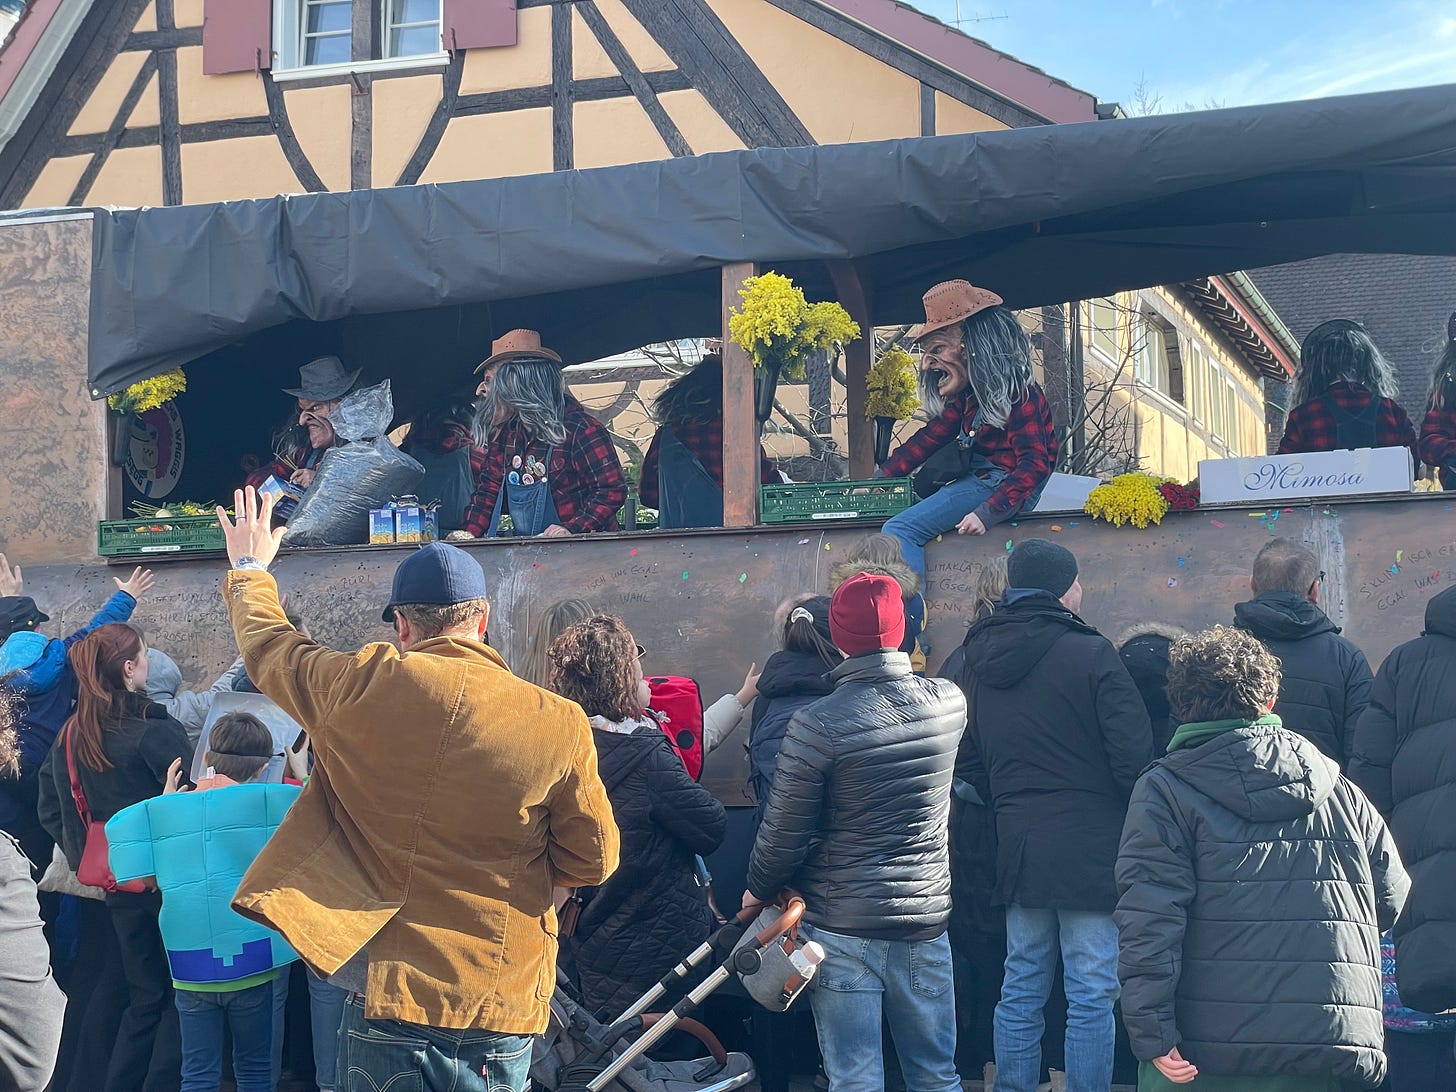 People wearing Freddy Kruger-like masks on a float at the Allschwiler Fasnacht